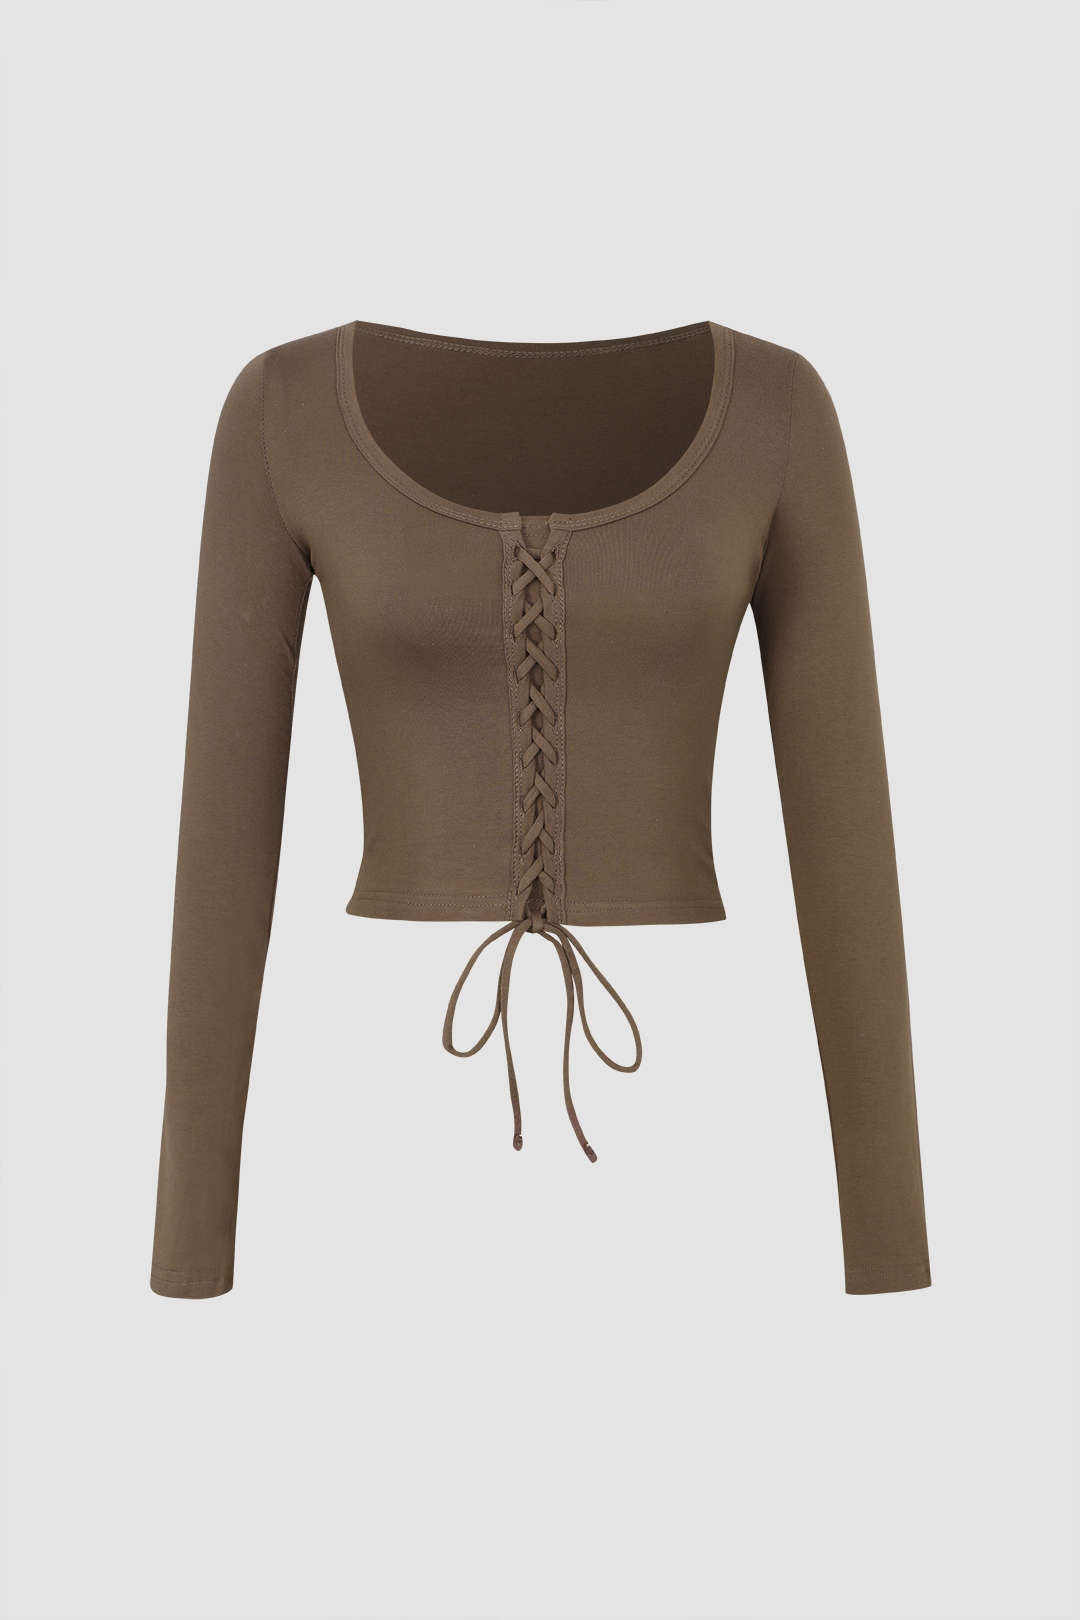 Lace Up Front Long Sleeve Top